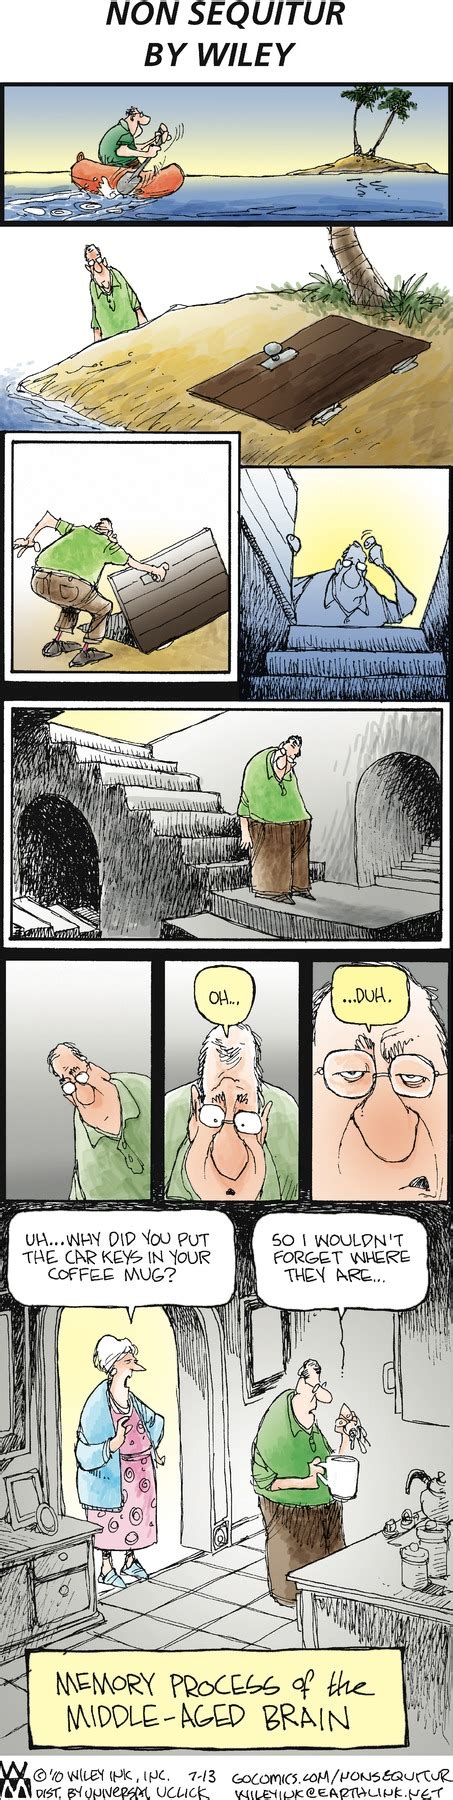 View the comic strip for Non Sequitur by cartoonist Wiley Mil